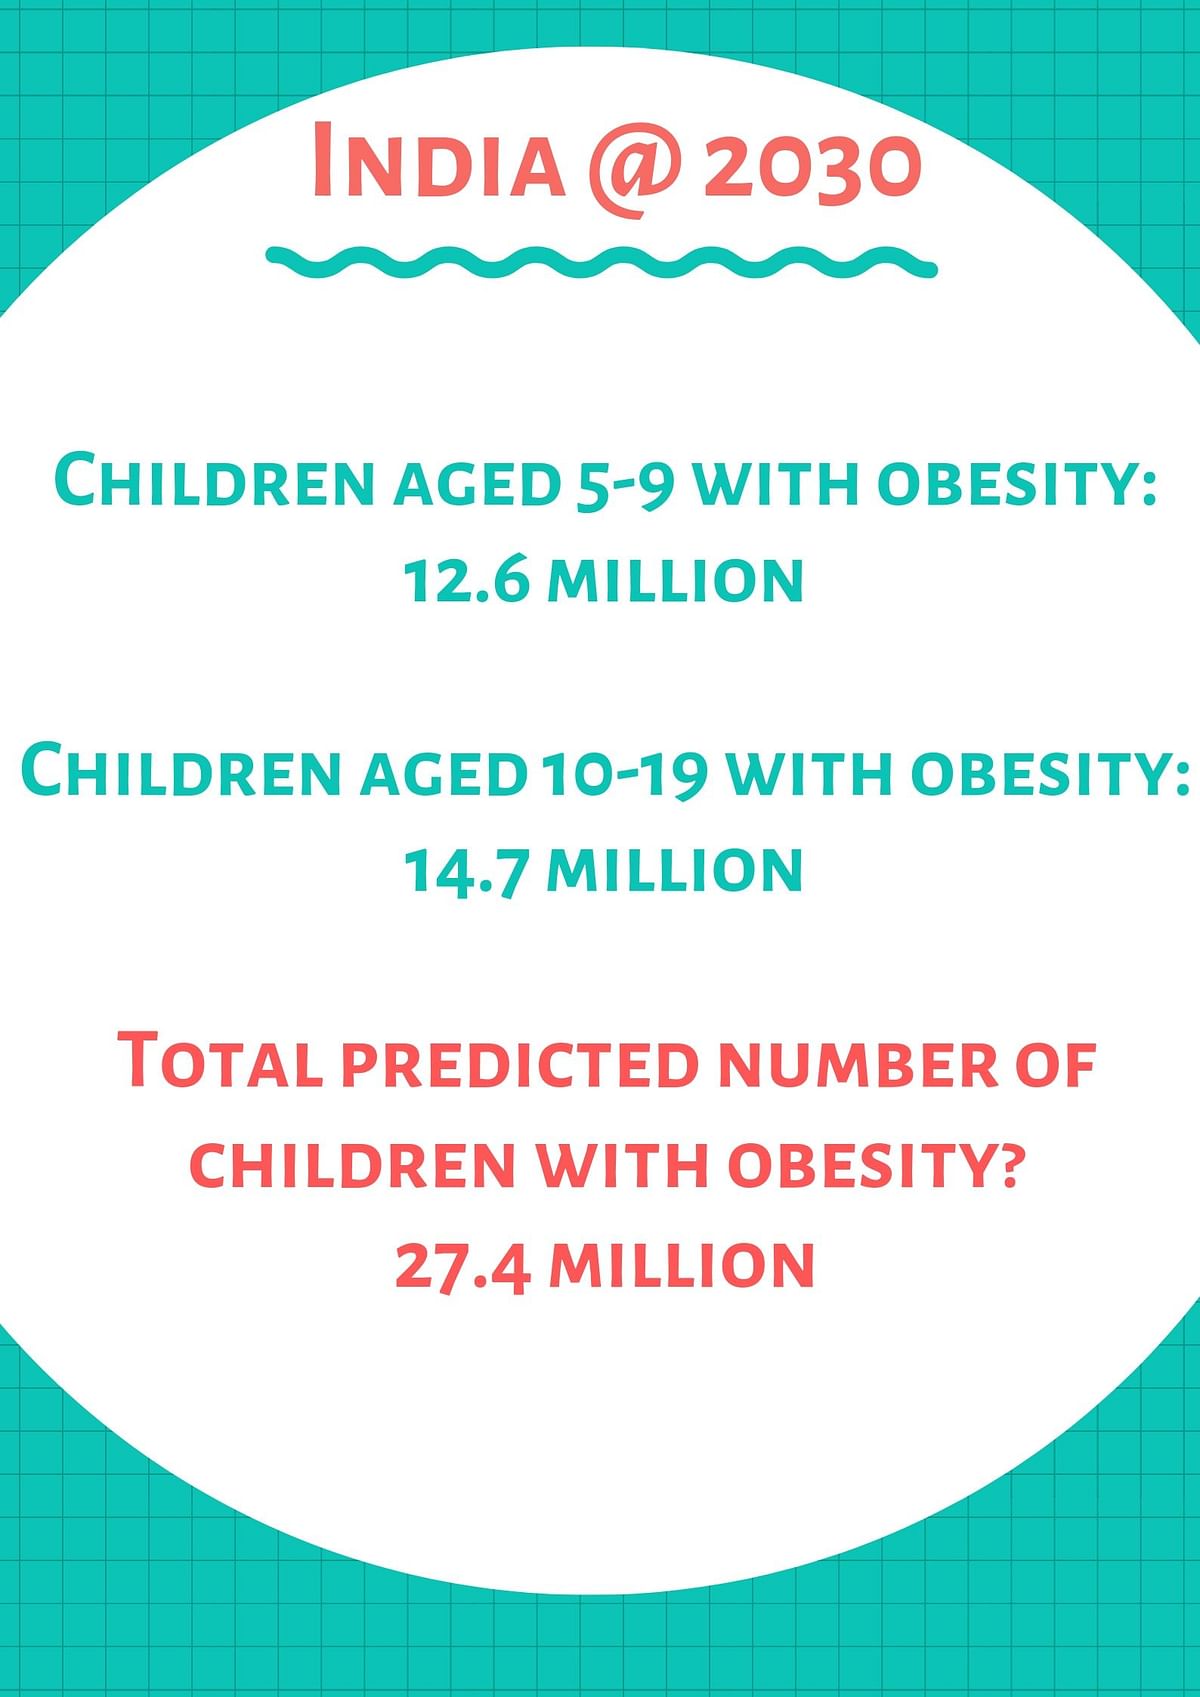  From early heart attacks to diabetic issues in your teens, what are the risks for kids with obesity?